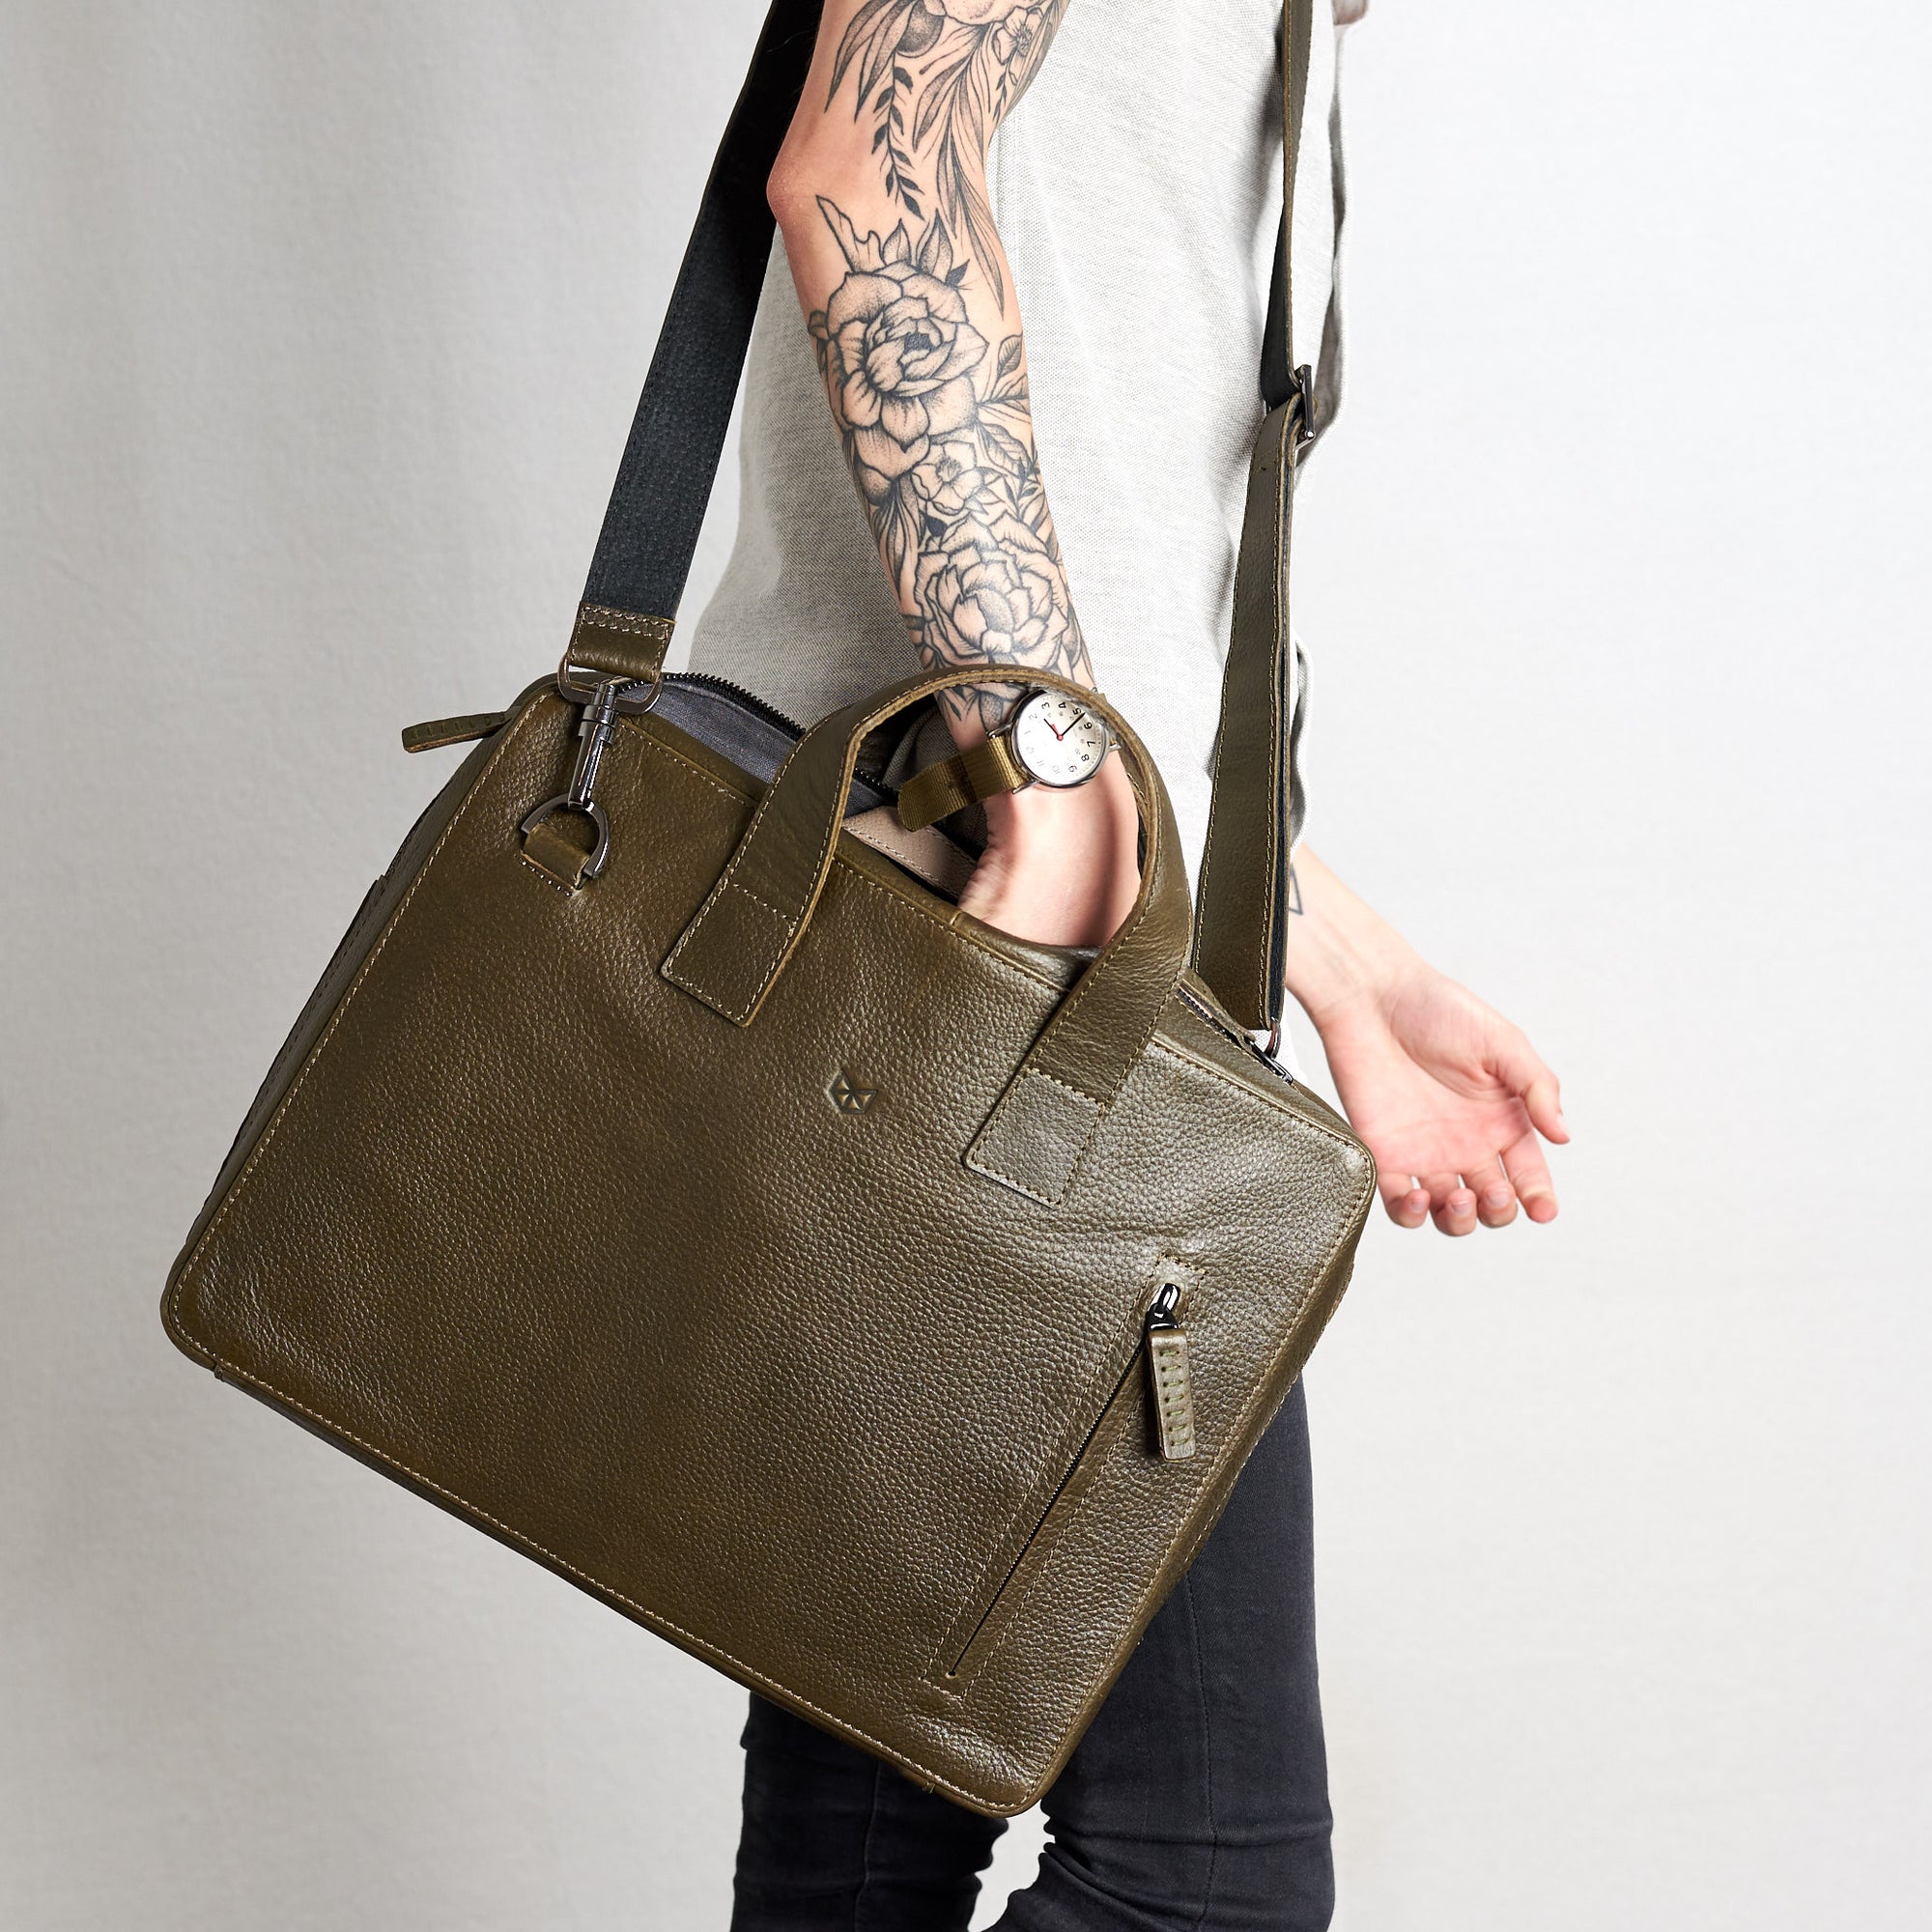 Style hand inside briefcase. Roko green by Capra Leather.